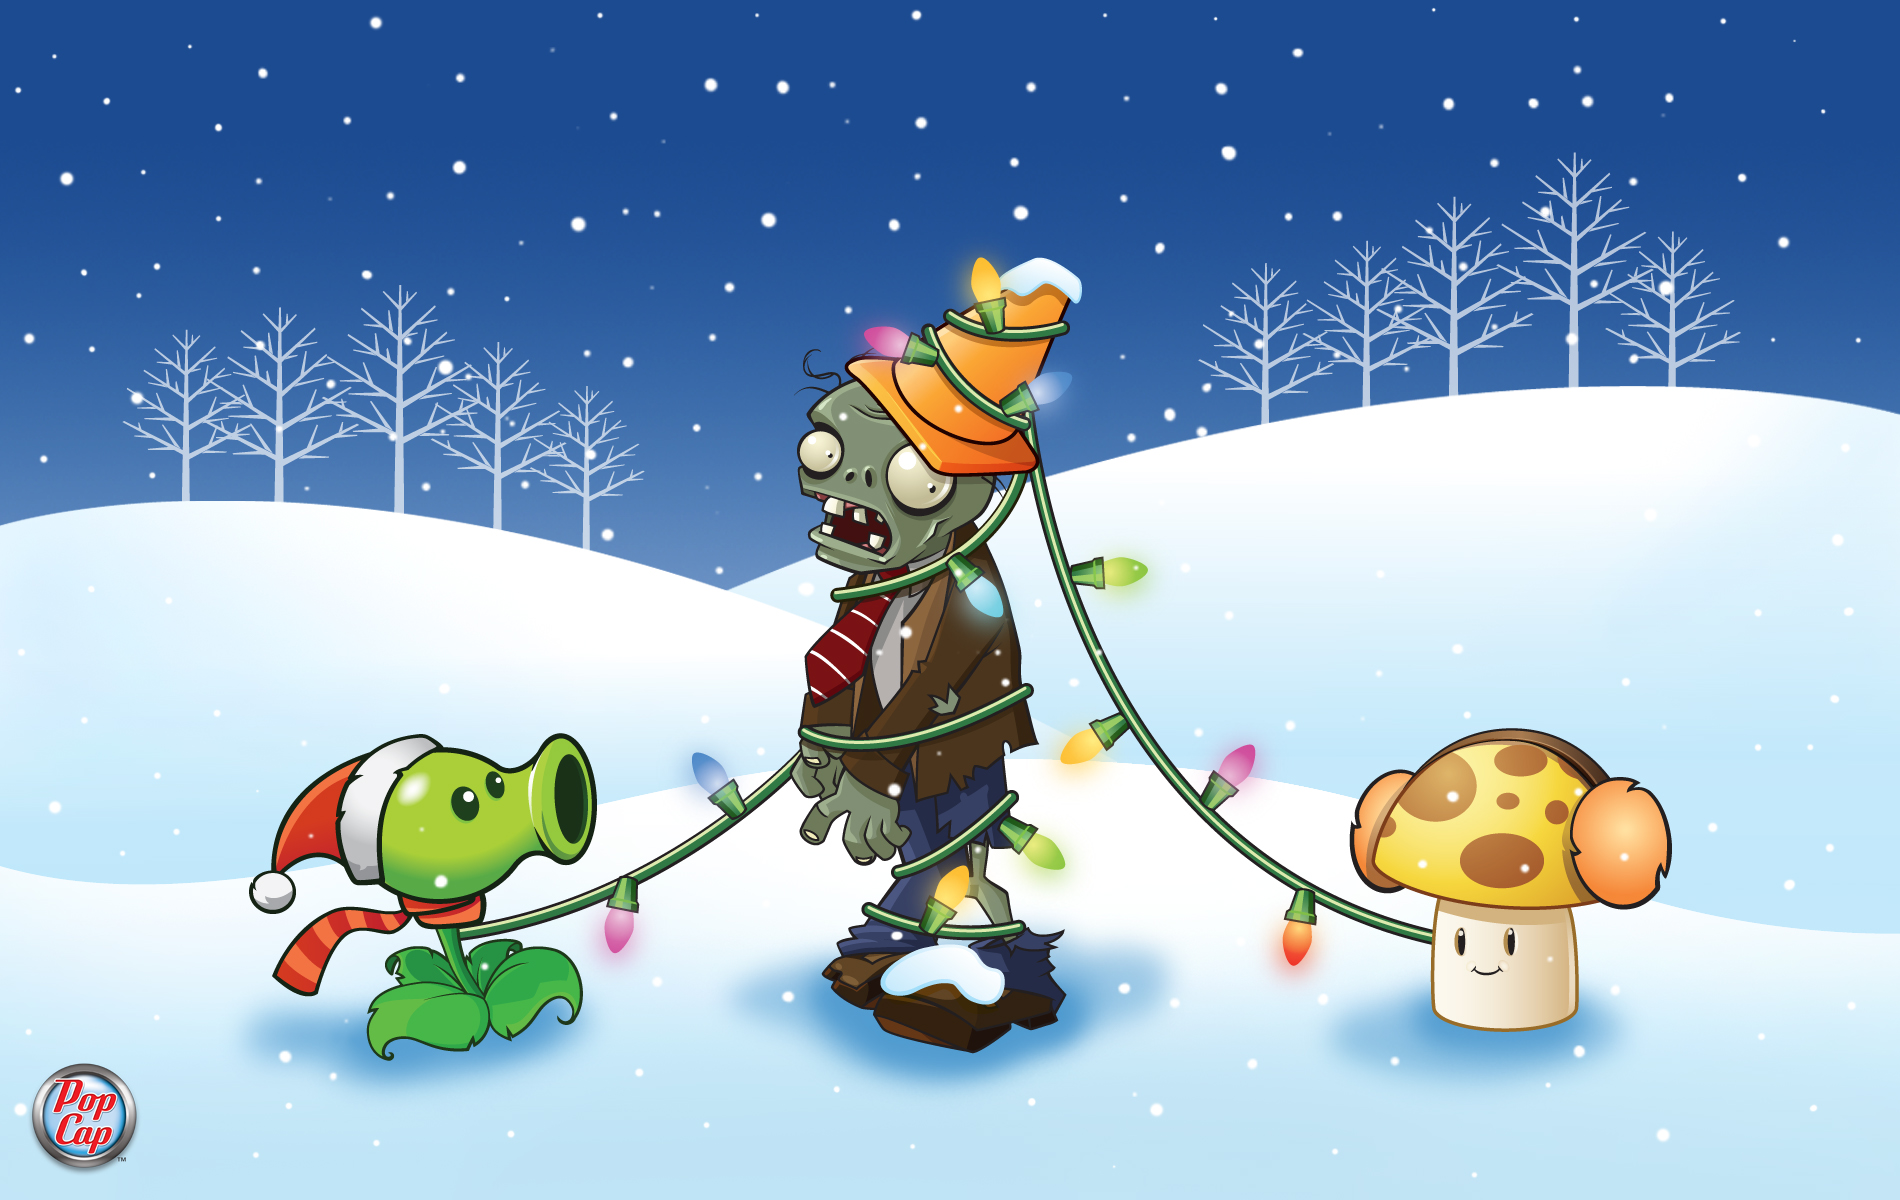 Pop Cap Games Has Created These Plants Vs Zombies Winter Wallpaper